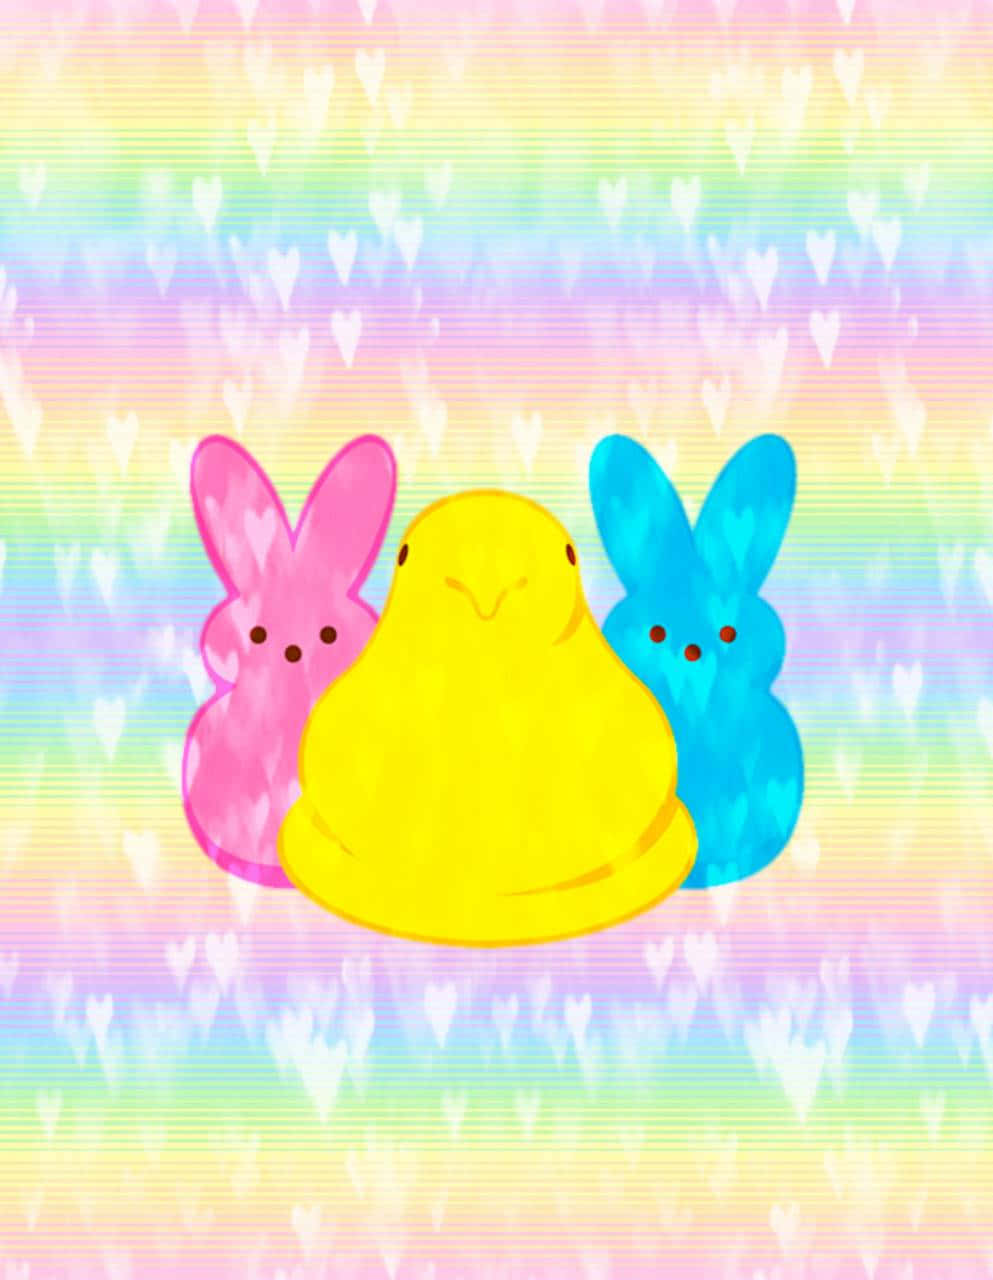 Celebrate Easter on Zoom with a joyful virtual background